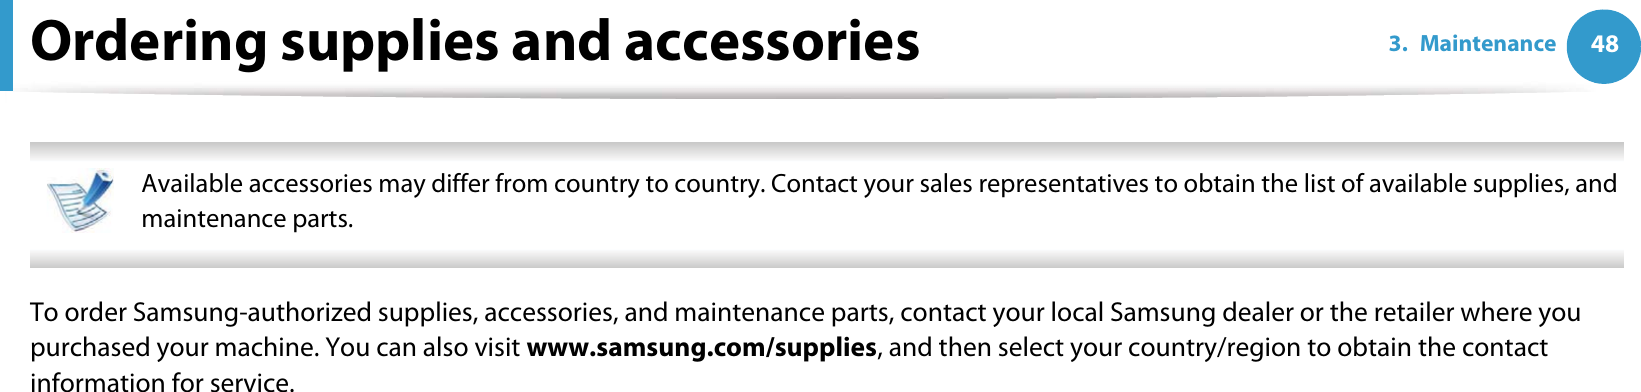 483. MaintenanceOrdering supplies and accessories Available accessories may differ from country to country. Contact your sales representatives to obtain the list of available supplies, and maintenance parts. To order Samsung-authorized supplies, accessories, and maintenance parts, contact your local Samsung dealer or the retailer where you purchased your machine. You can also visit www.samsung.com/supplies, and then select your country/region to obtain the contact information for service.